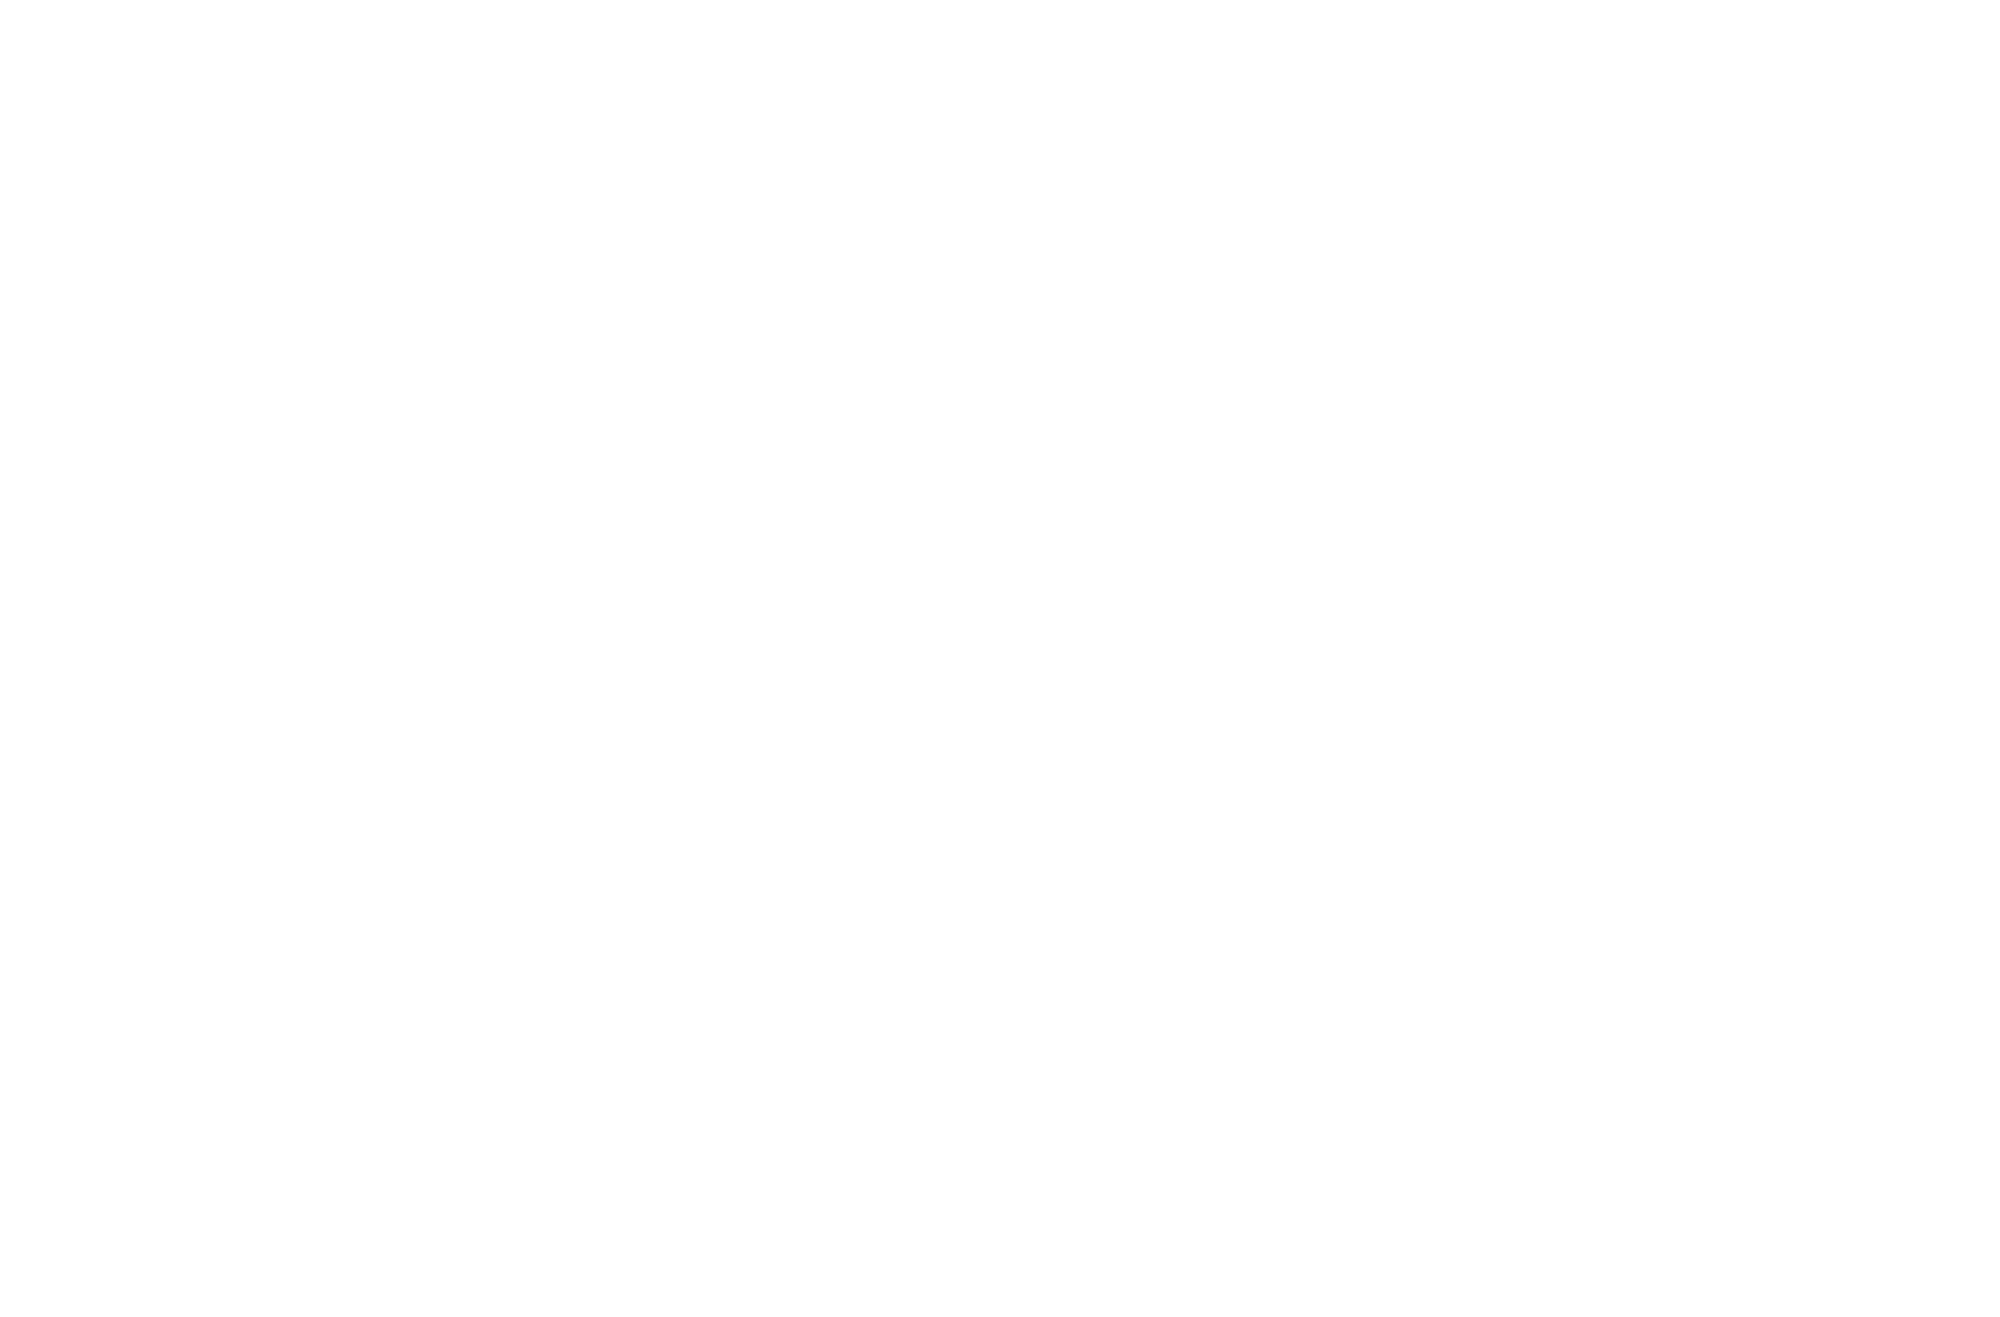 DECOMICA – AS A BRAND KNOWN FOR QUALITY AND EXCELLENT SERVICE